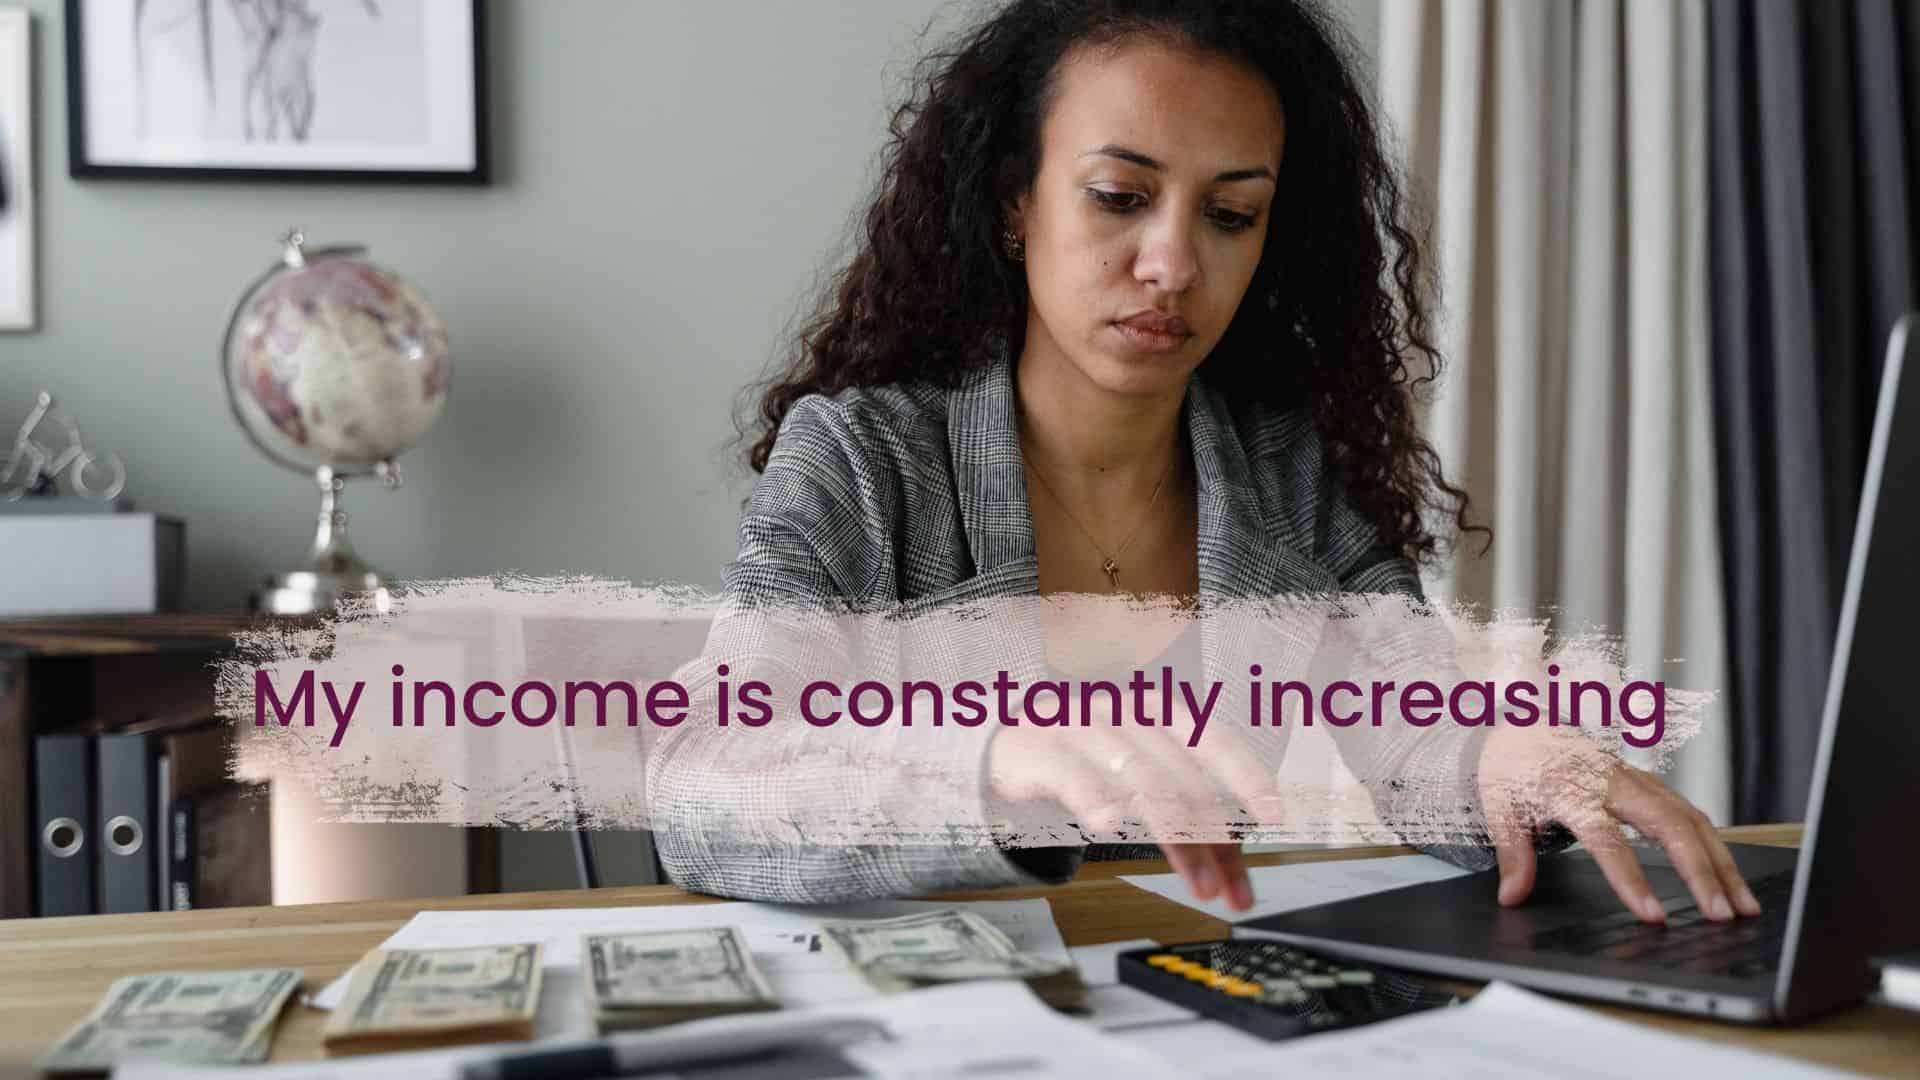 My income is constantly increasing